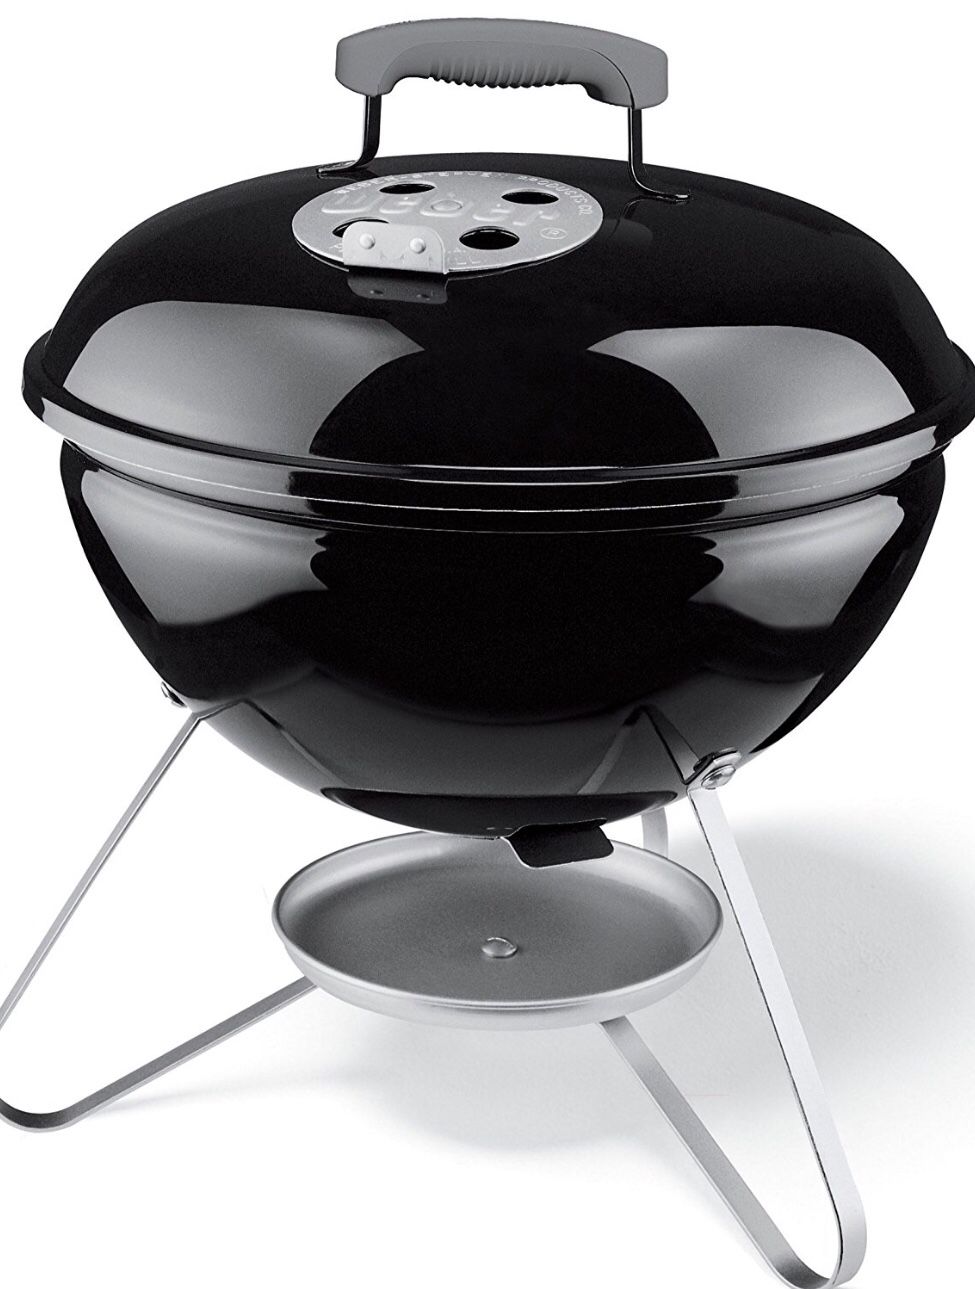 Weber Smokey Joe Grill - in time for the 4th